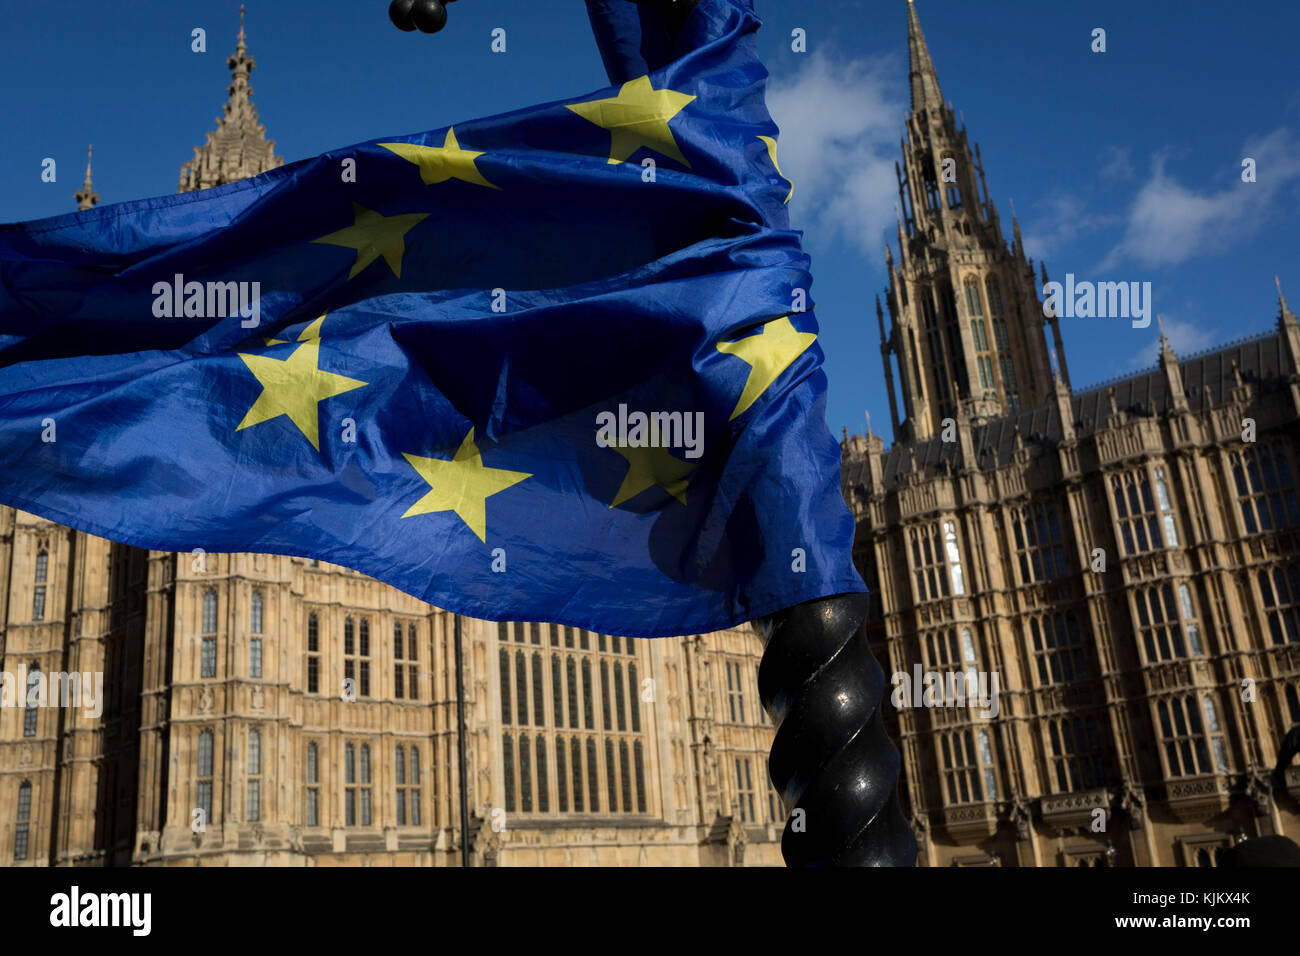 The stars of the EU flag is tangled on a lamp post near the Houses of Parliament in Westminster, seat of government and power of the United Kingdom during Brexit negotiations with Brussels, on 23rd November 2017, in London England. Stock Photo